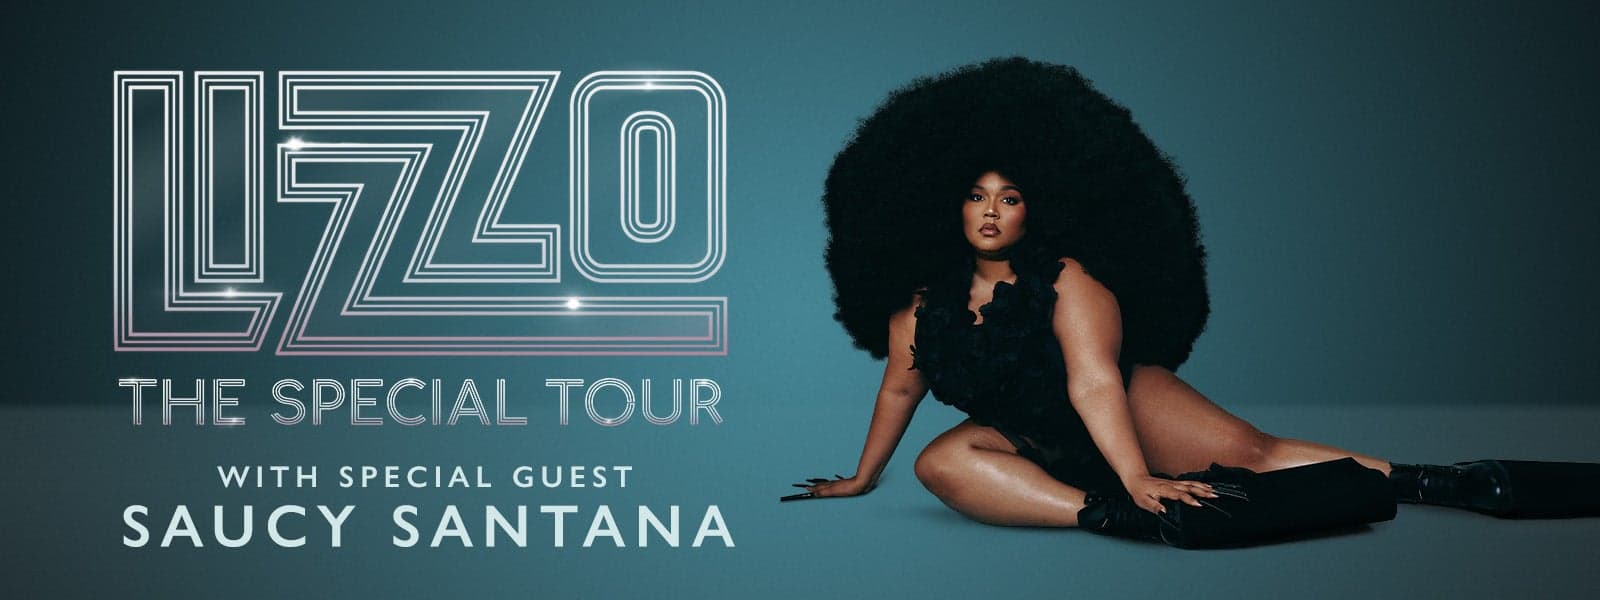 Lizzo - The Speical Tour with special guest Saucy Santana on September 24 at 8PM